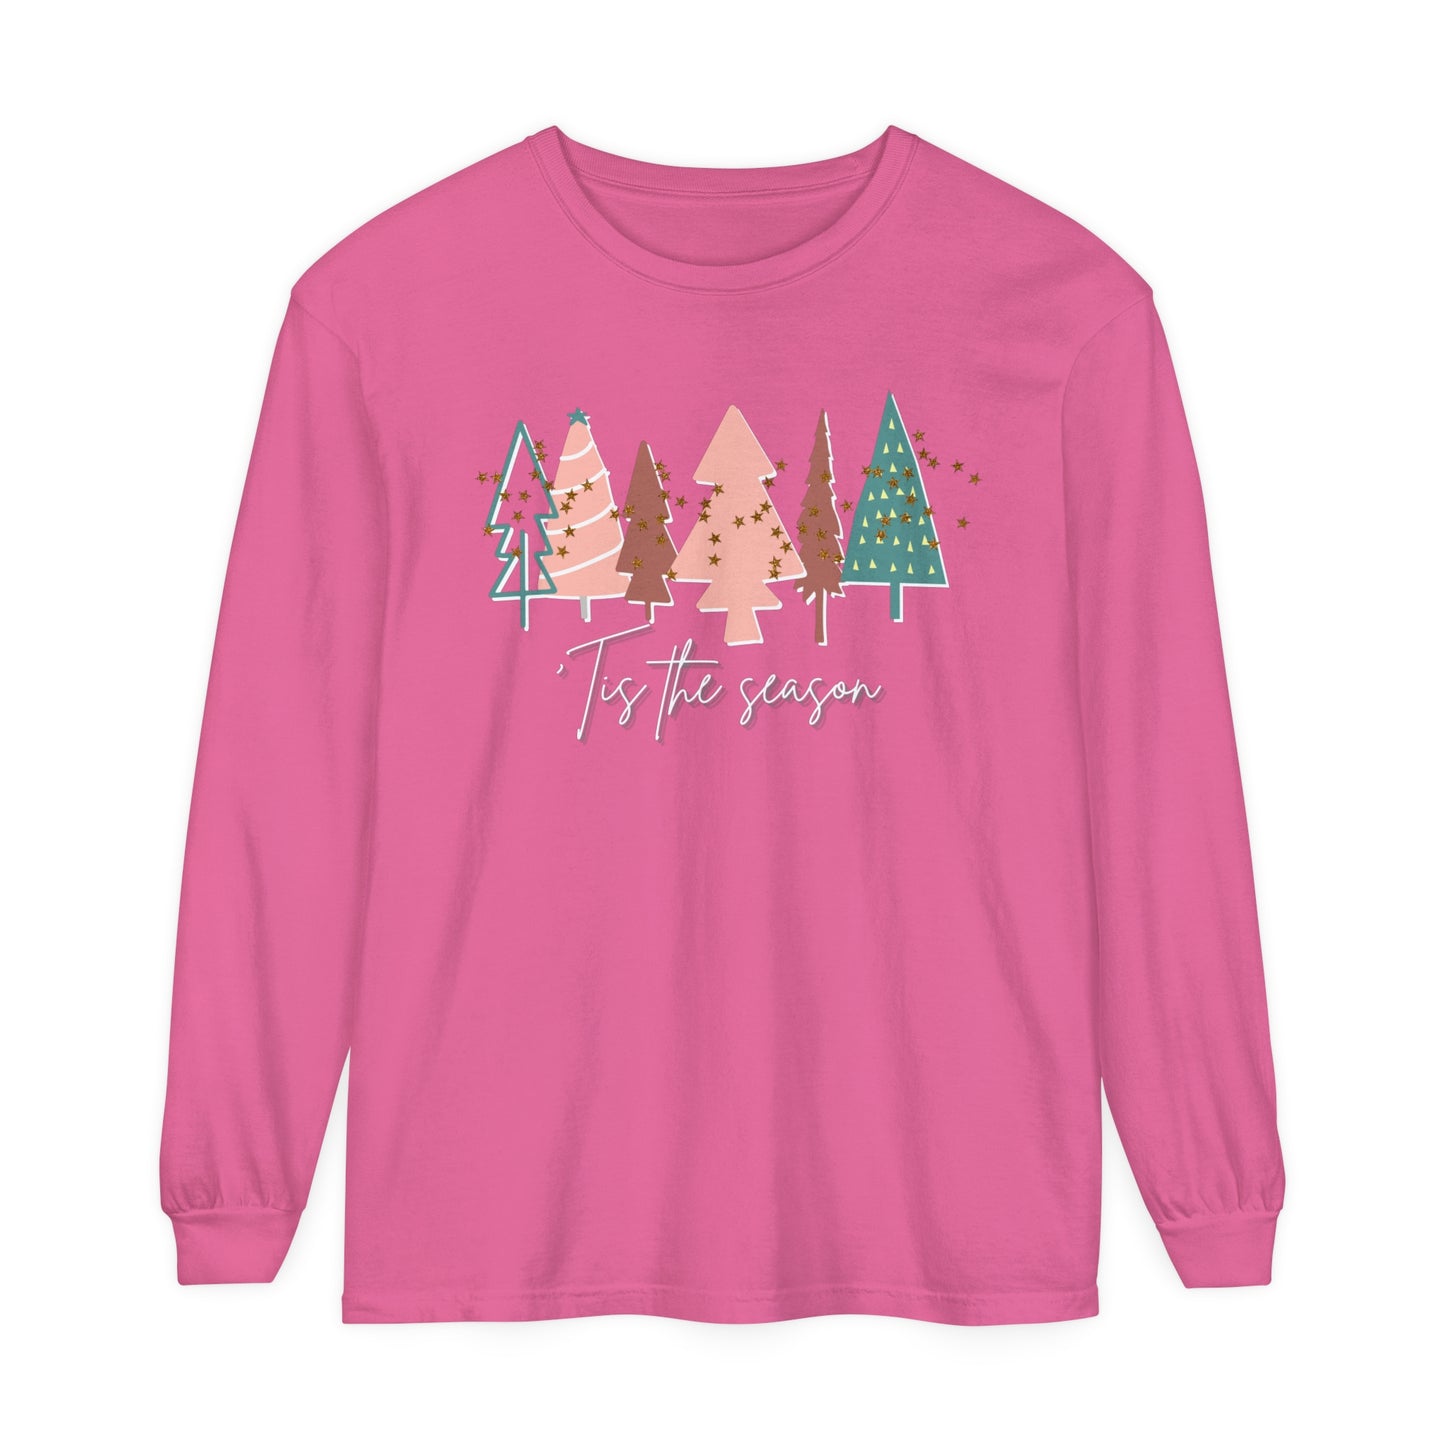 Stay cozy this winter with our Printify Merry Christmas long sleeve tee, perfect for adding a festive touch to your winter wardrobe. With its comfortable fit and standout holiday design, this Women's 'Tis the Season Crunchberry Pink Christmas Tree Shirt from Comfort Colors Holiday Tee is the ultimate Christmas T-shirt.